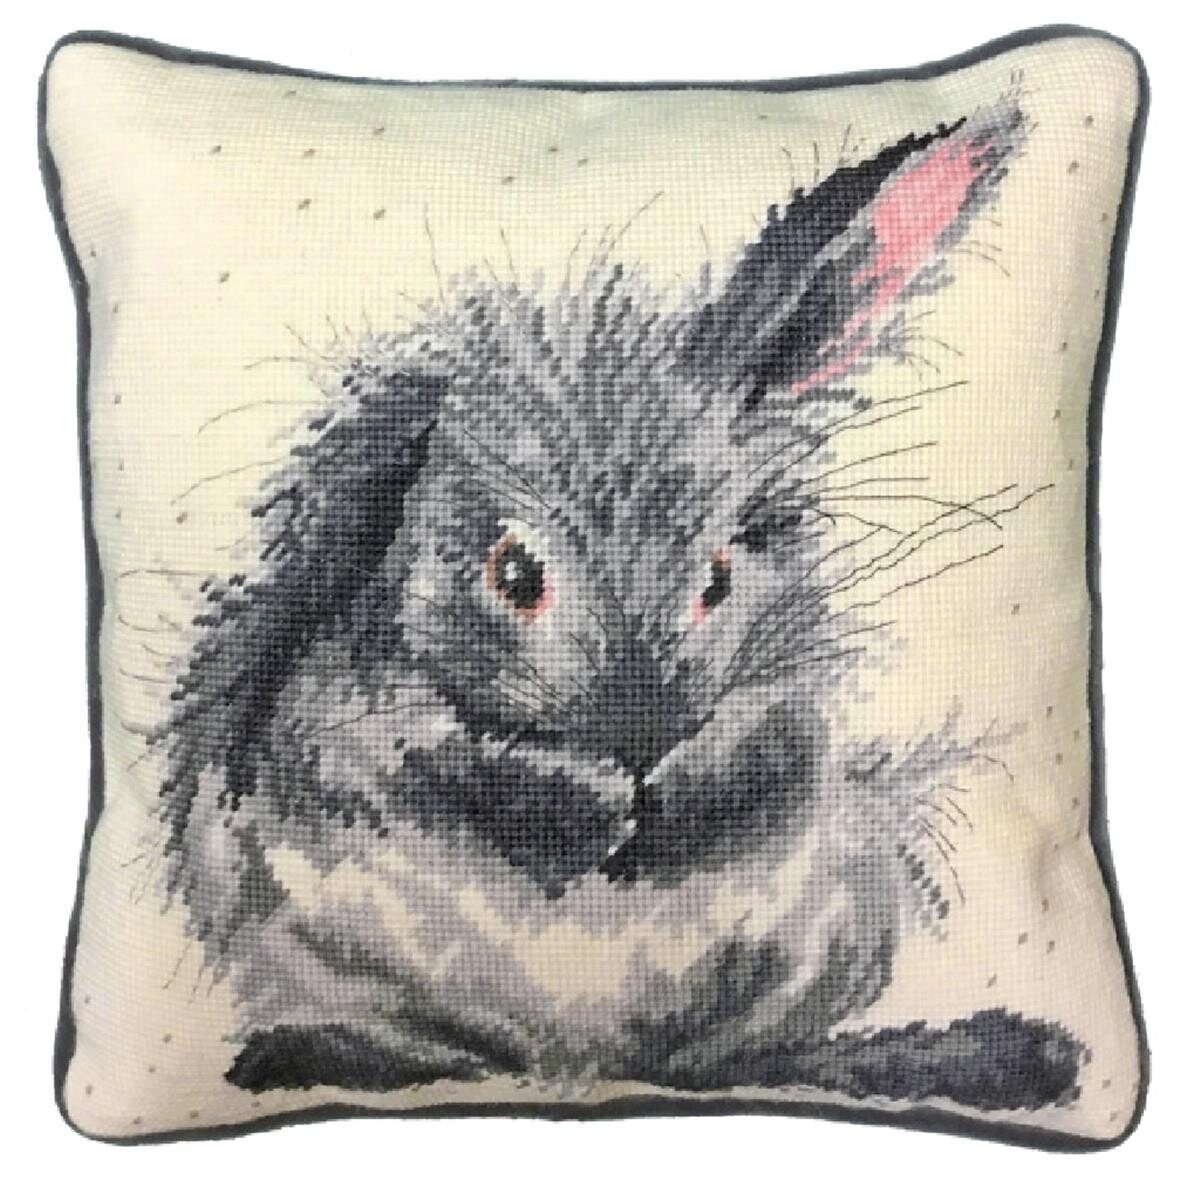 A square embroidery cushion, made as an adorable...